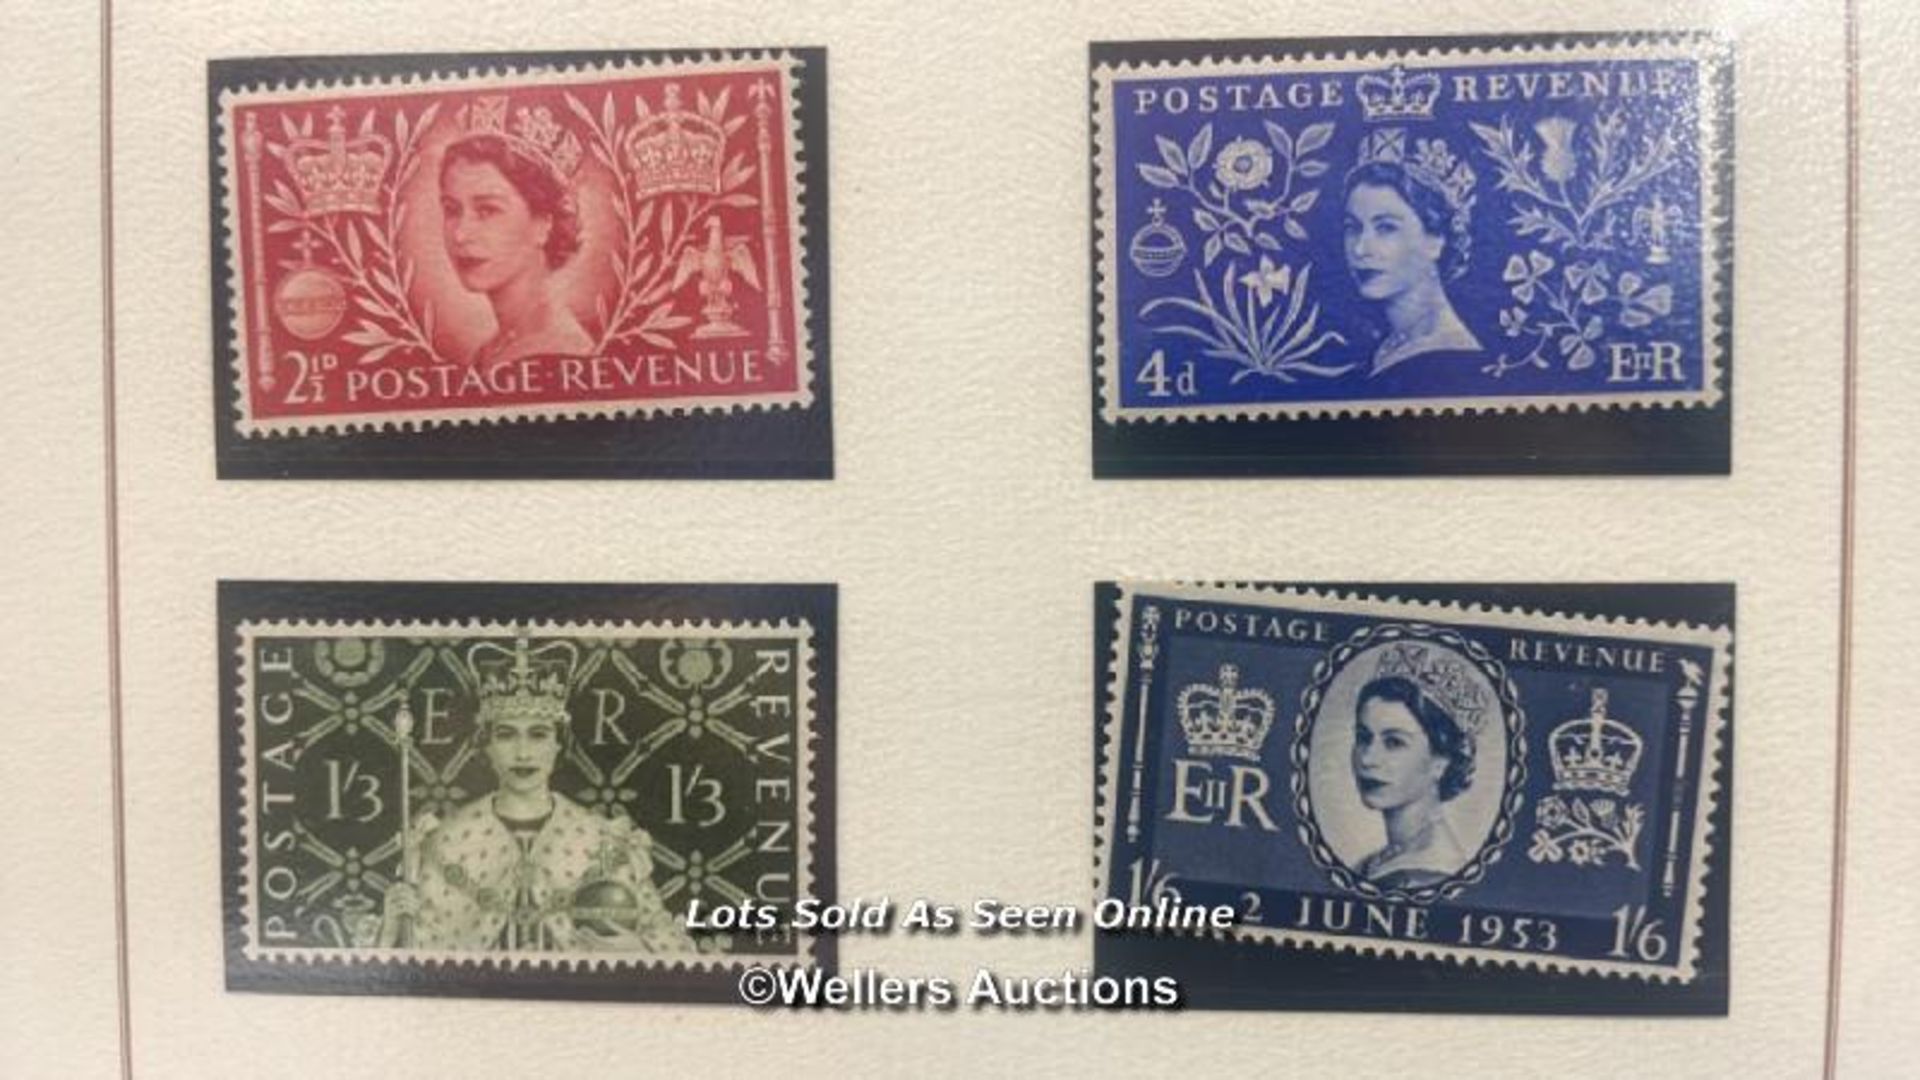 HARRINTON & BYRNE THE UNITED KINGDOM UNMOUNTED MINT 1953 CORONATION STAMP COLLECTION - Image 2 of 4